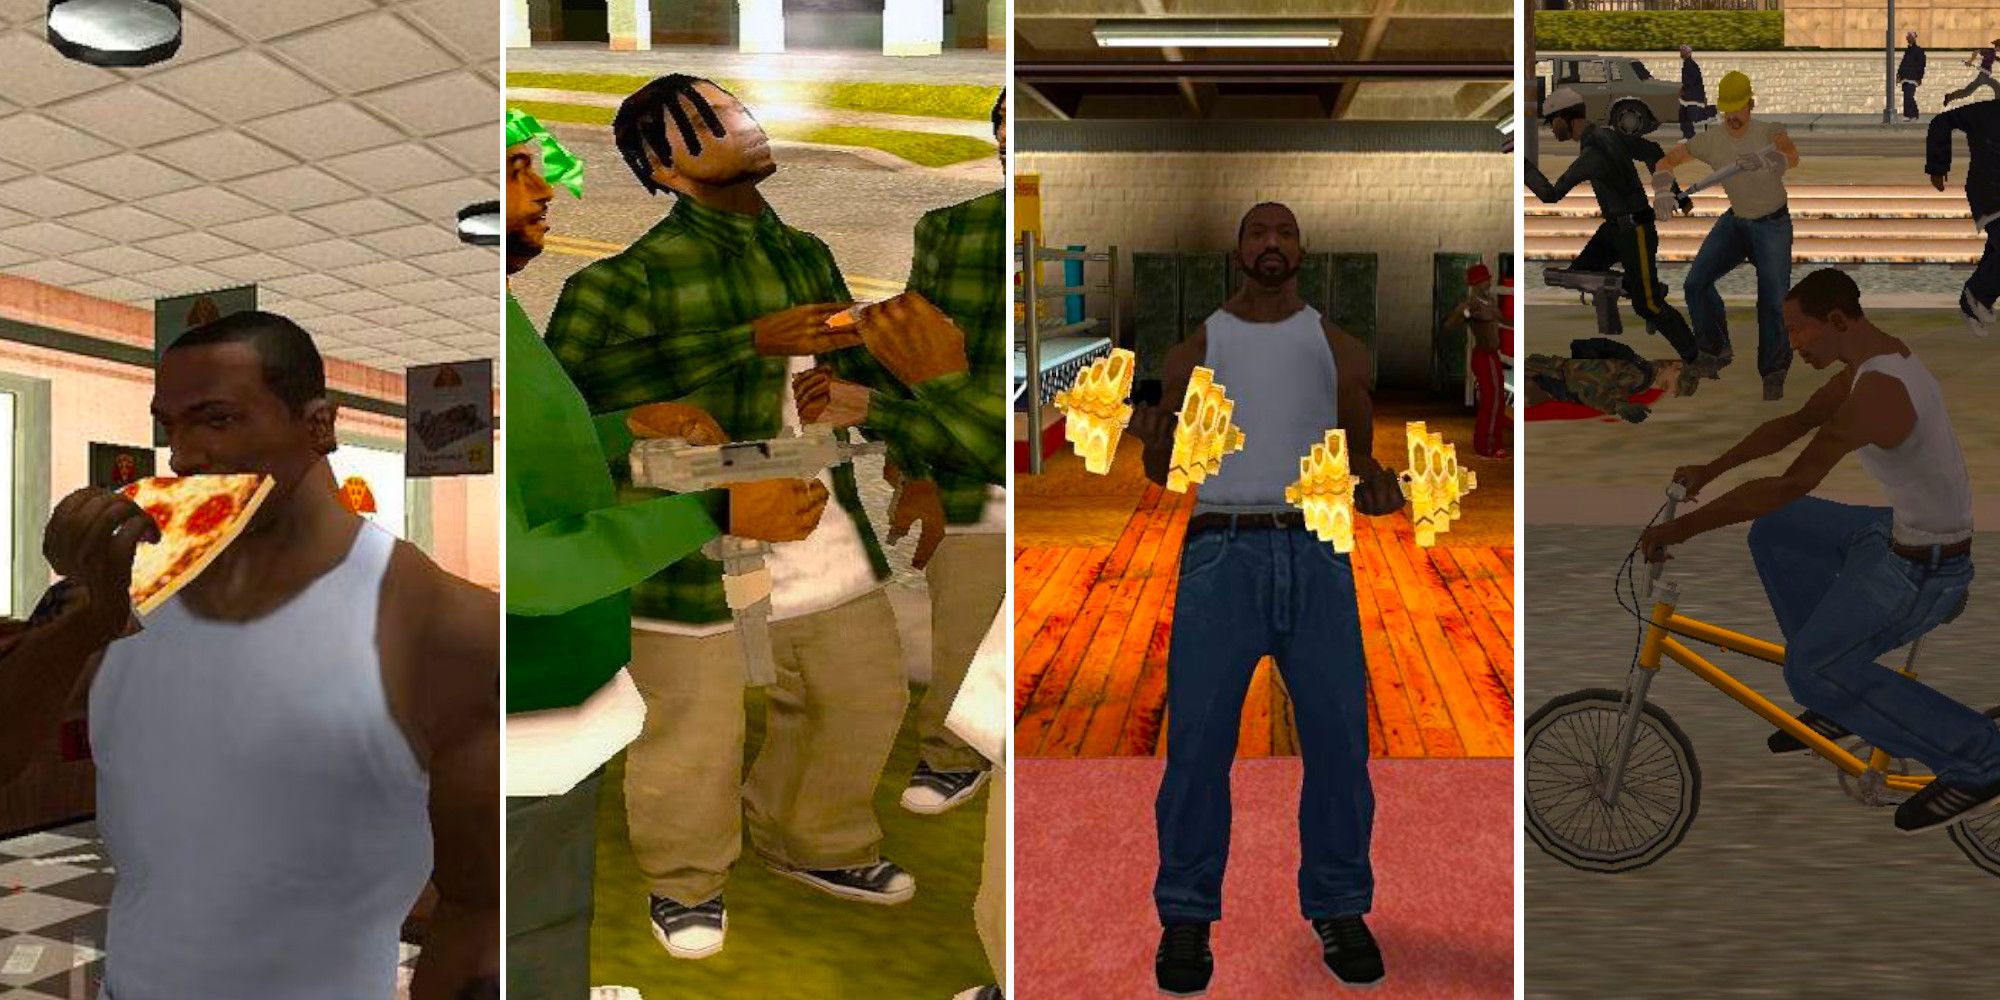 Carl Johnson eats pizza, a gang loiters with weapons, Carl Johnson lifts weights, and Carl Johnson rides a BMX while pedestrians fight behind him